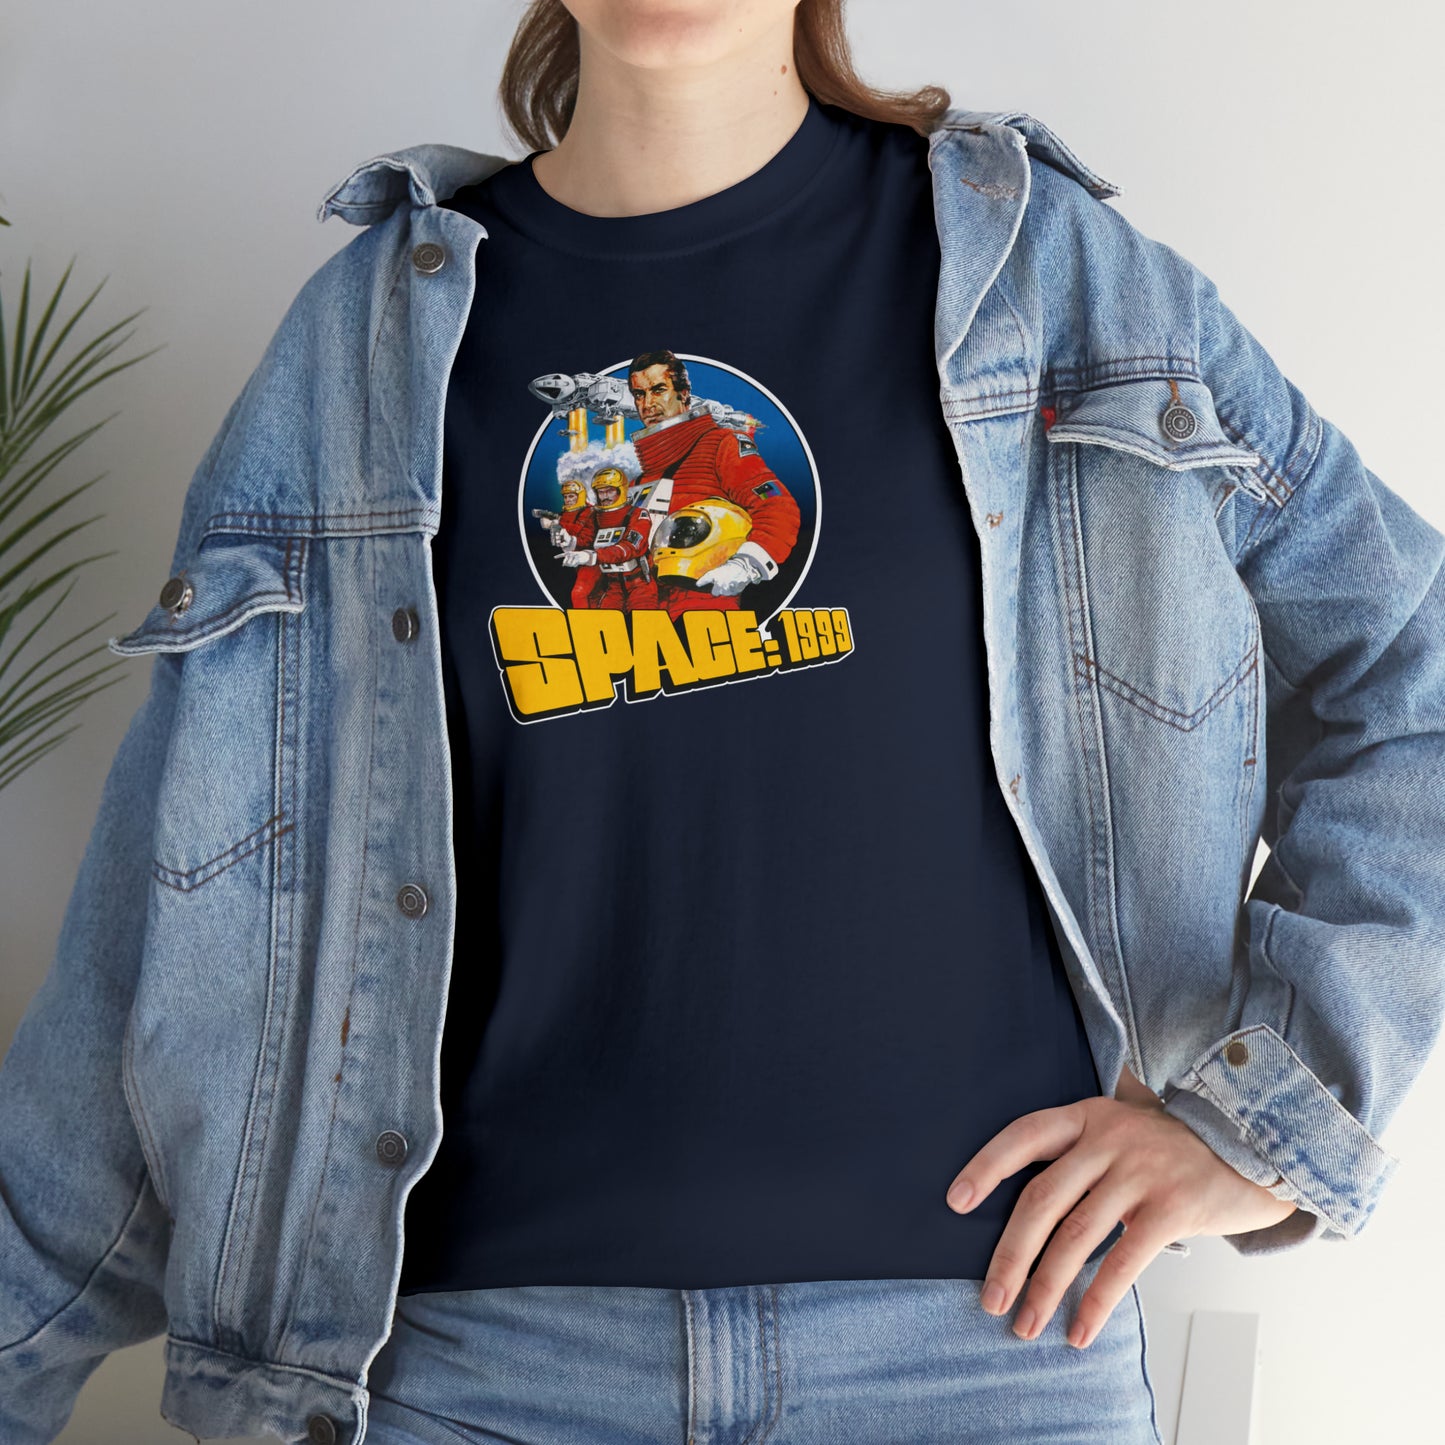 Space: 1999 T-Shirt